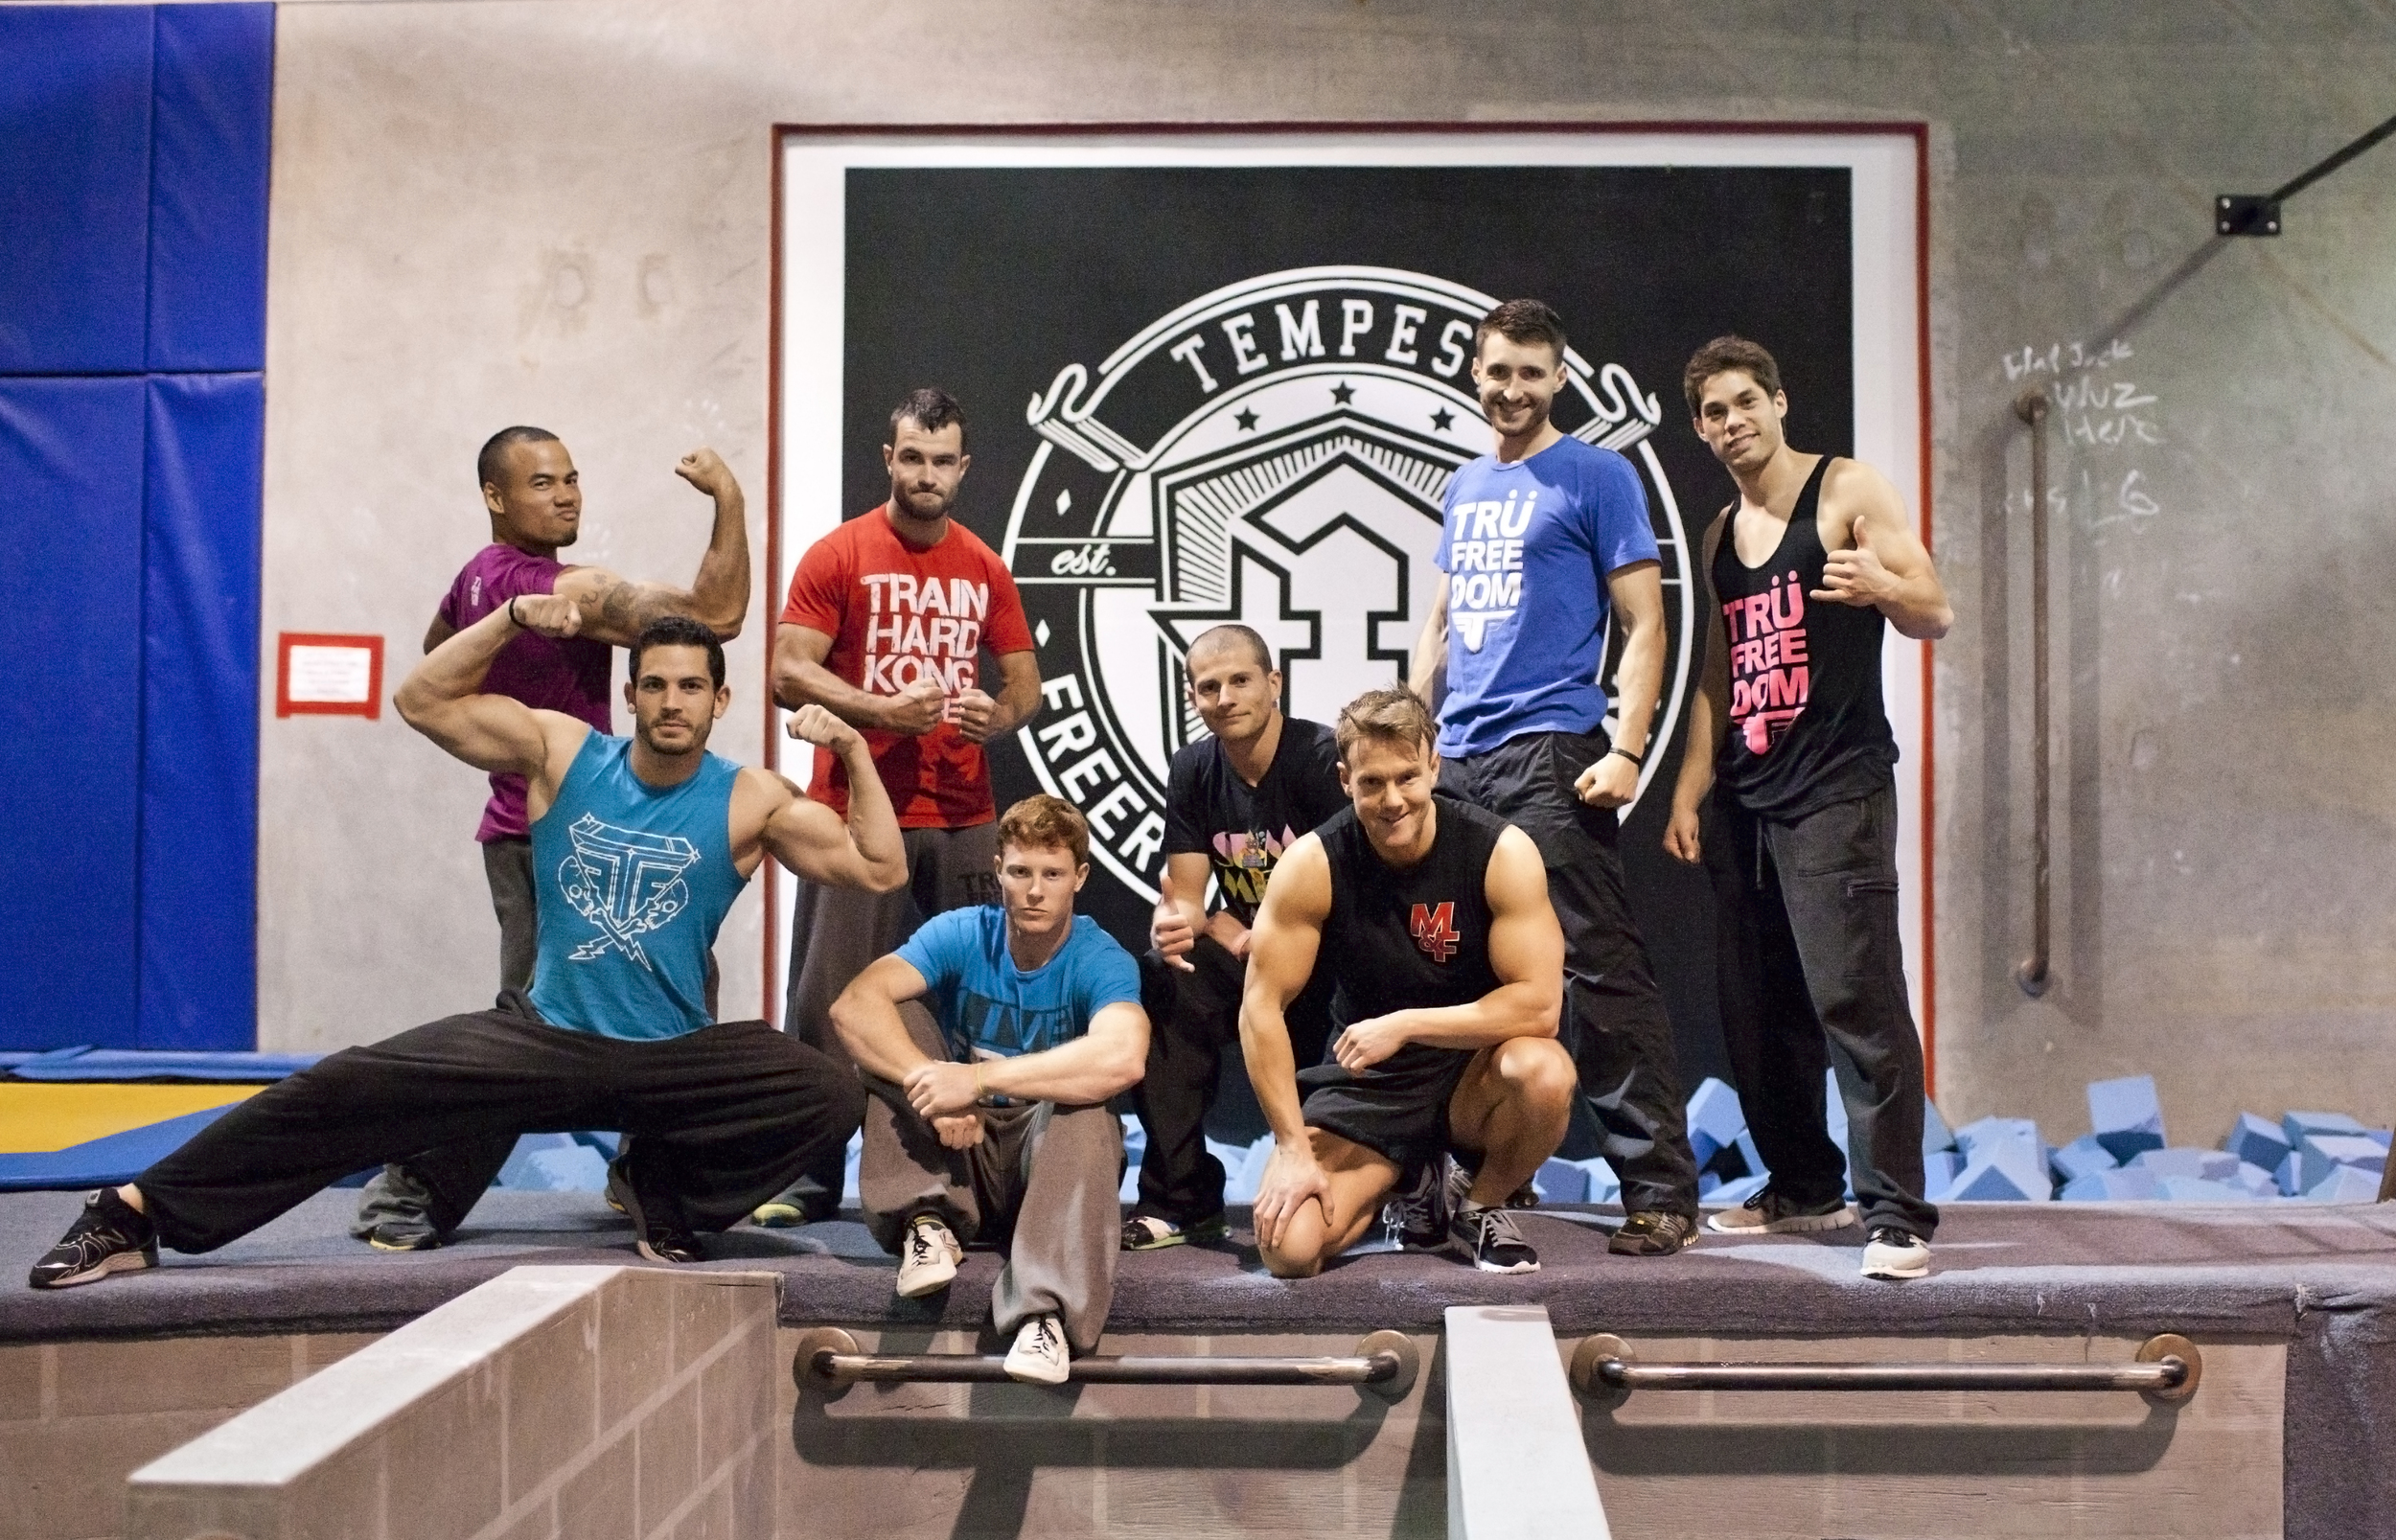  Muscle and Fitness Magazine on location at Tempest Freerunning Academy ca.2012 